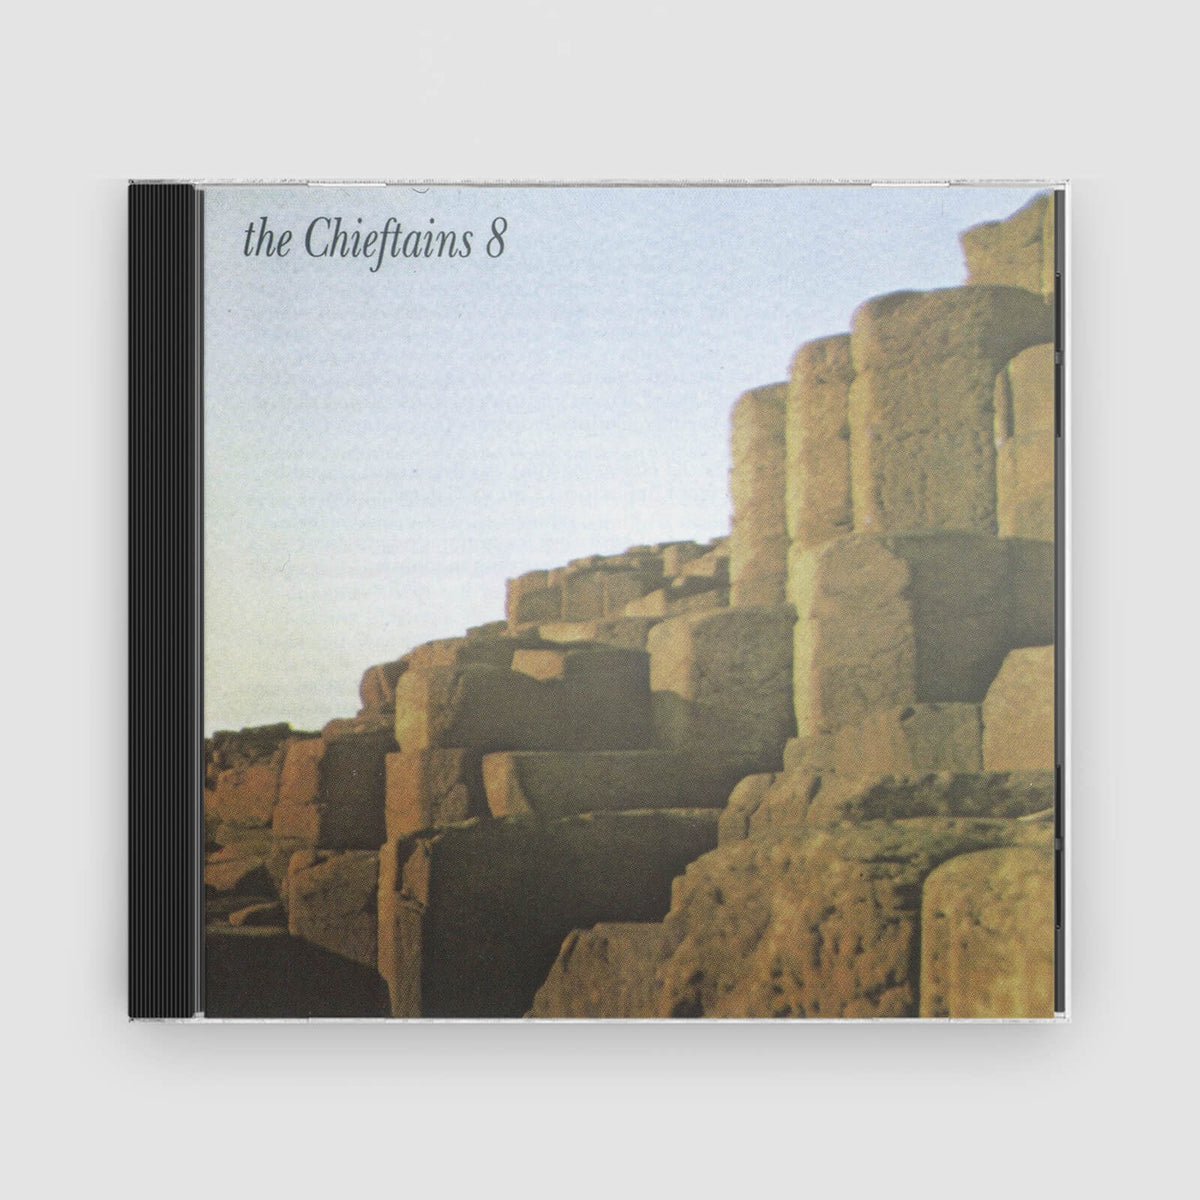 The Chieftains : The Chieftains 8